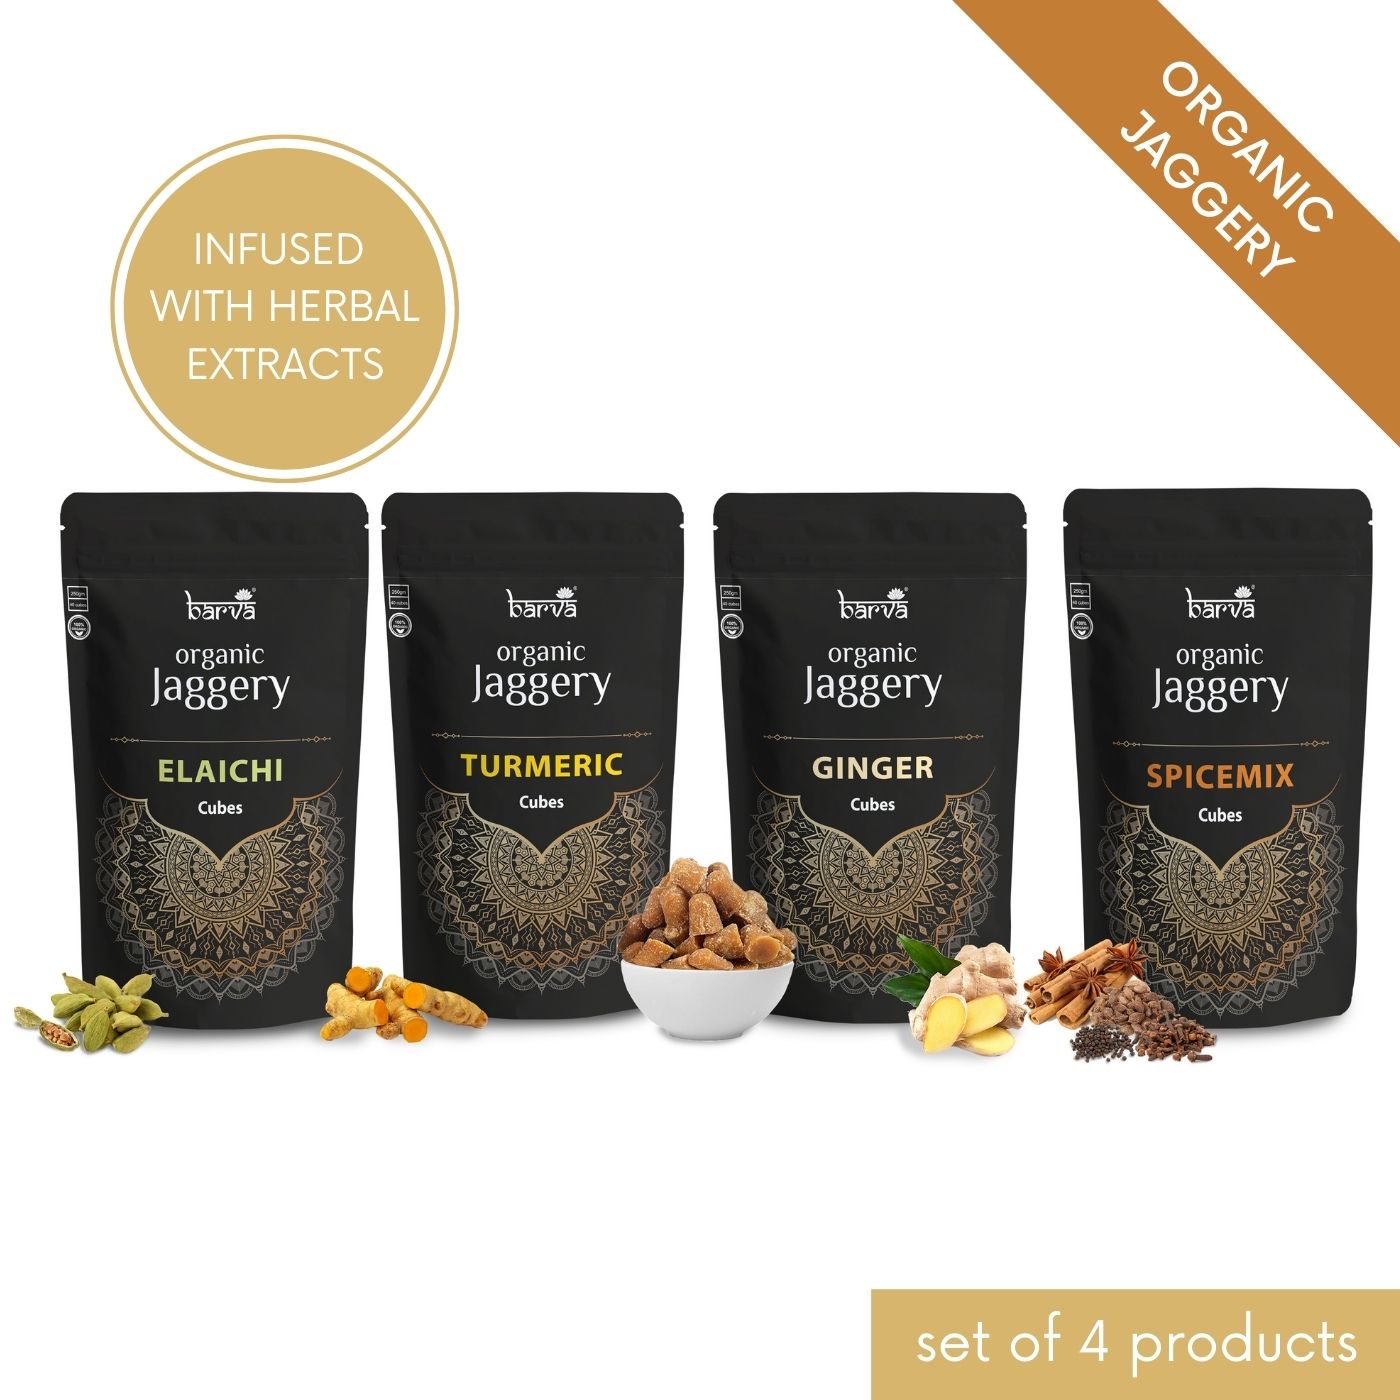 Organic Jaggery infused with potent herbal extracts